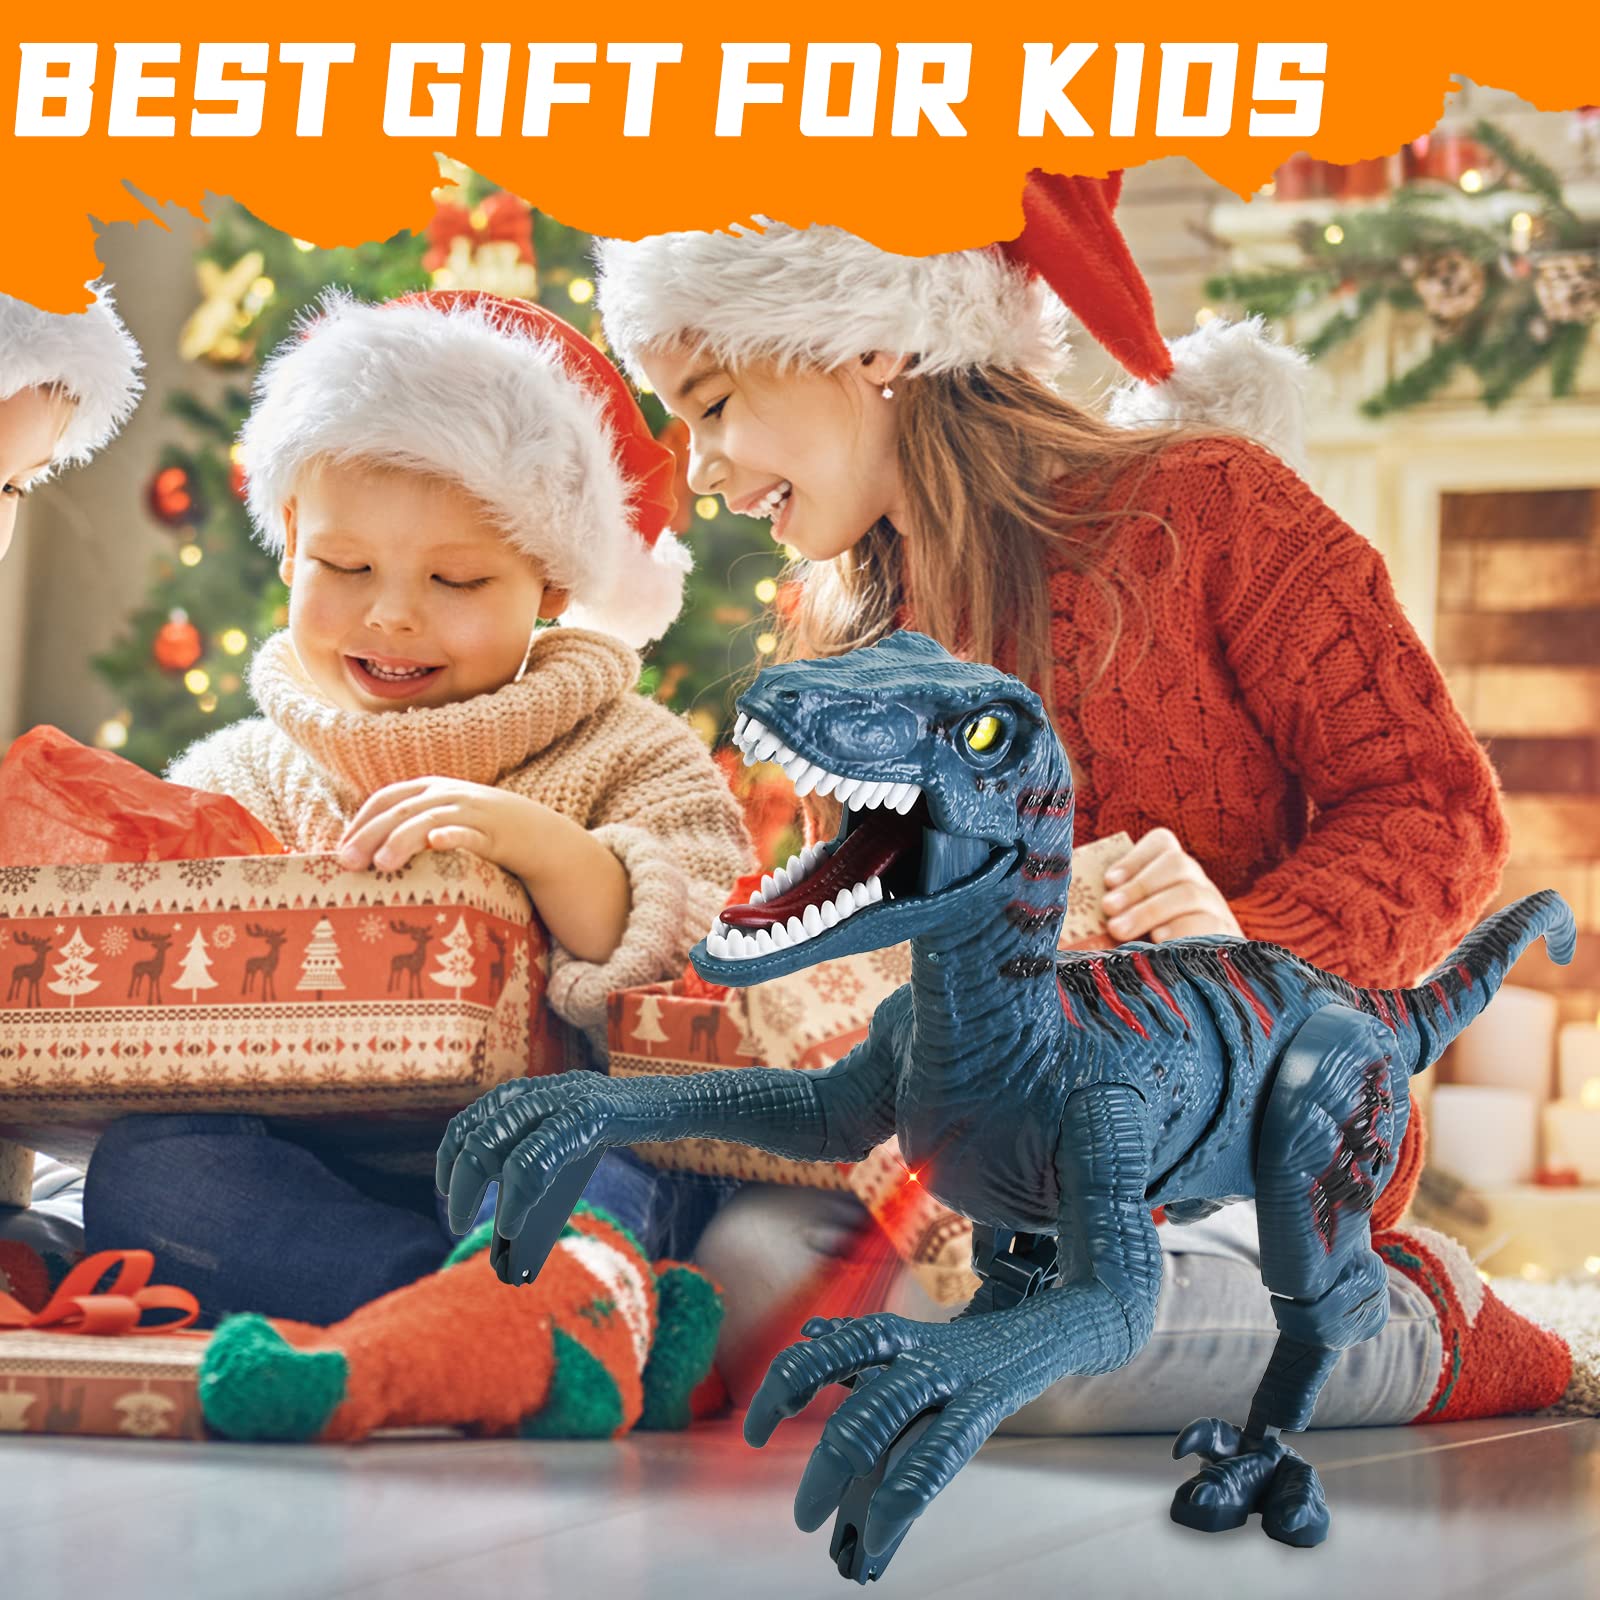 Remote Control Dinosaur Toys for Kids - Walking Robot Dinosaur Toy for Boys Age 5-7, RC Jurassic Velociraptor Toys 8-12, Robotic Blue Dino with Light Sounds, Birthday Dinosaur Gifts Toys 3+ Year Old